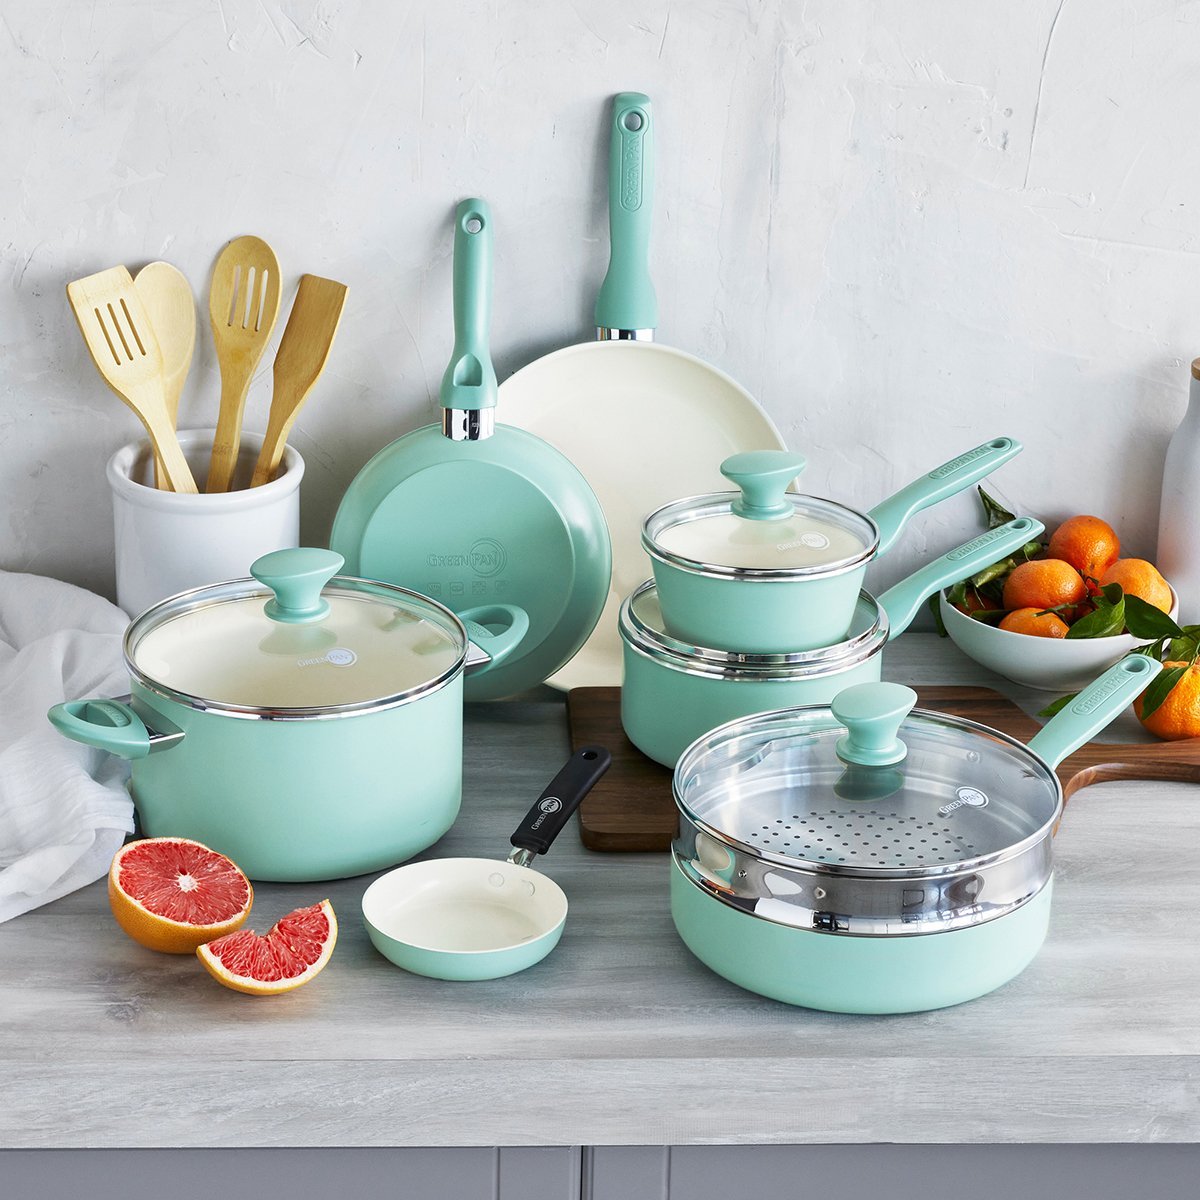 5 Non-Toxic Cookware Brands — Old World New